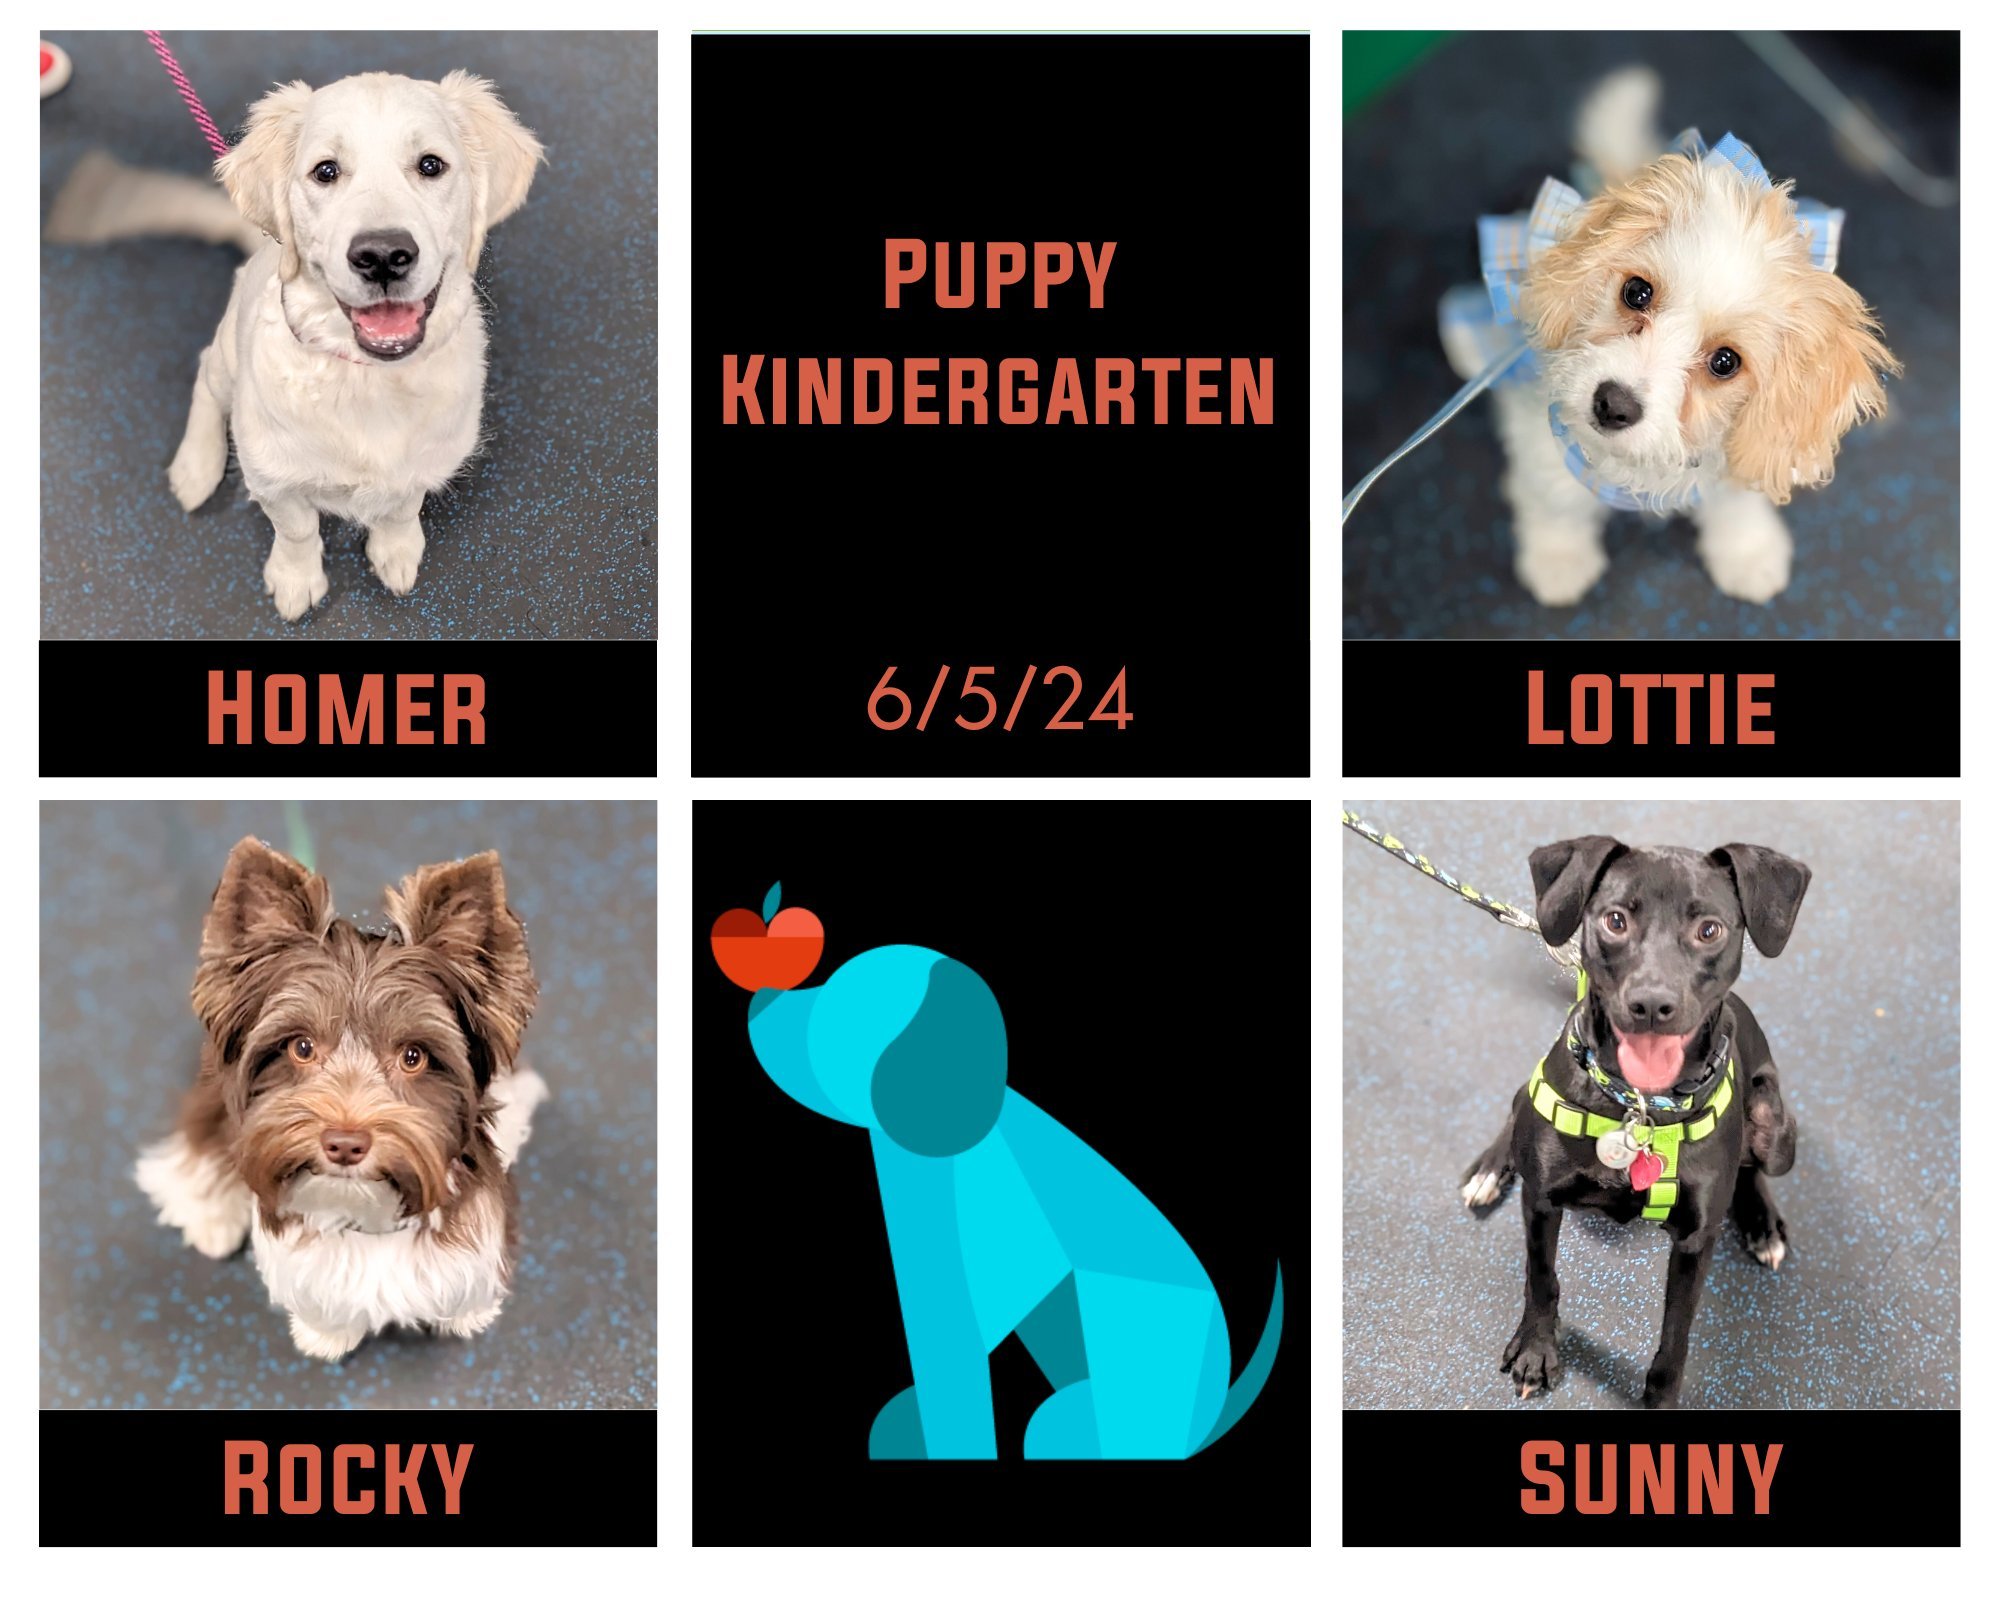 Last night some adorable babes graduated their Puppy Kindergarten! 😍  Each pup is full of personality and it was a joy to watch them learn how to express themselves.  They learned new skills and practiced their socialization, including watching each